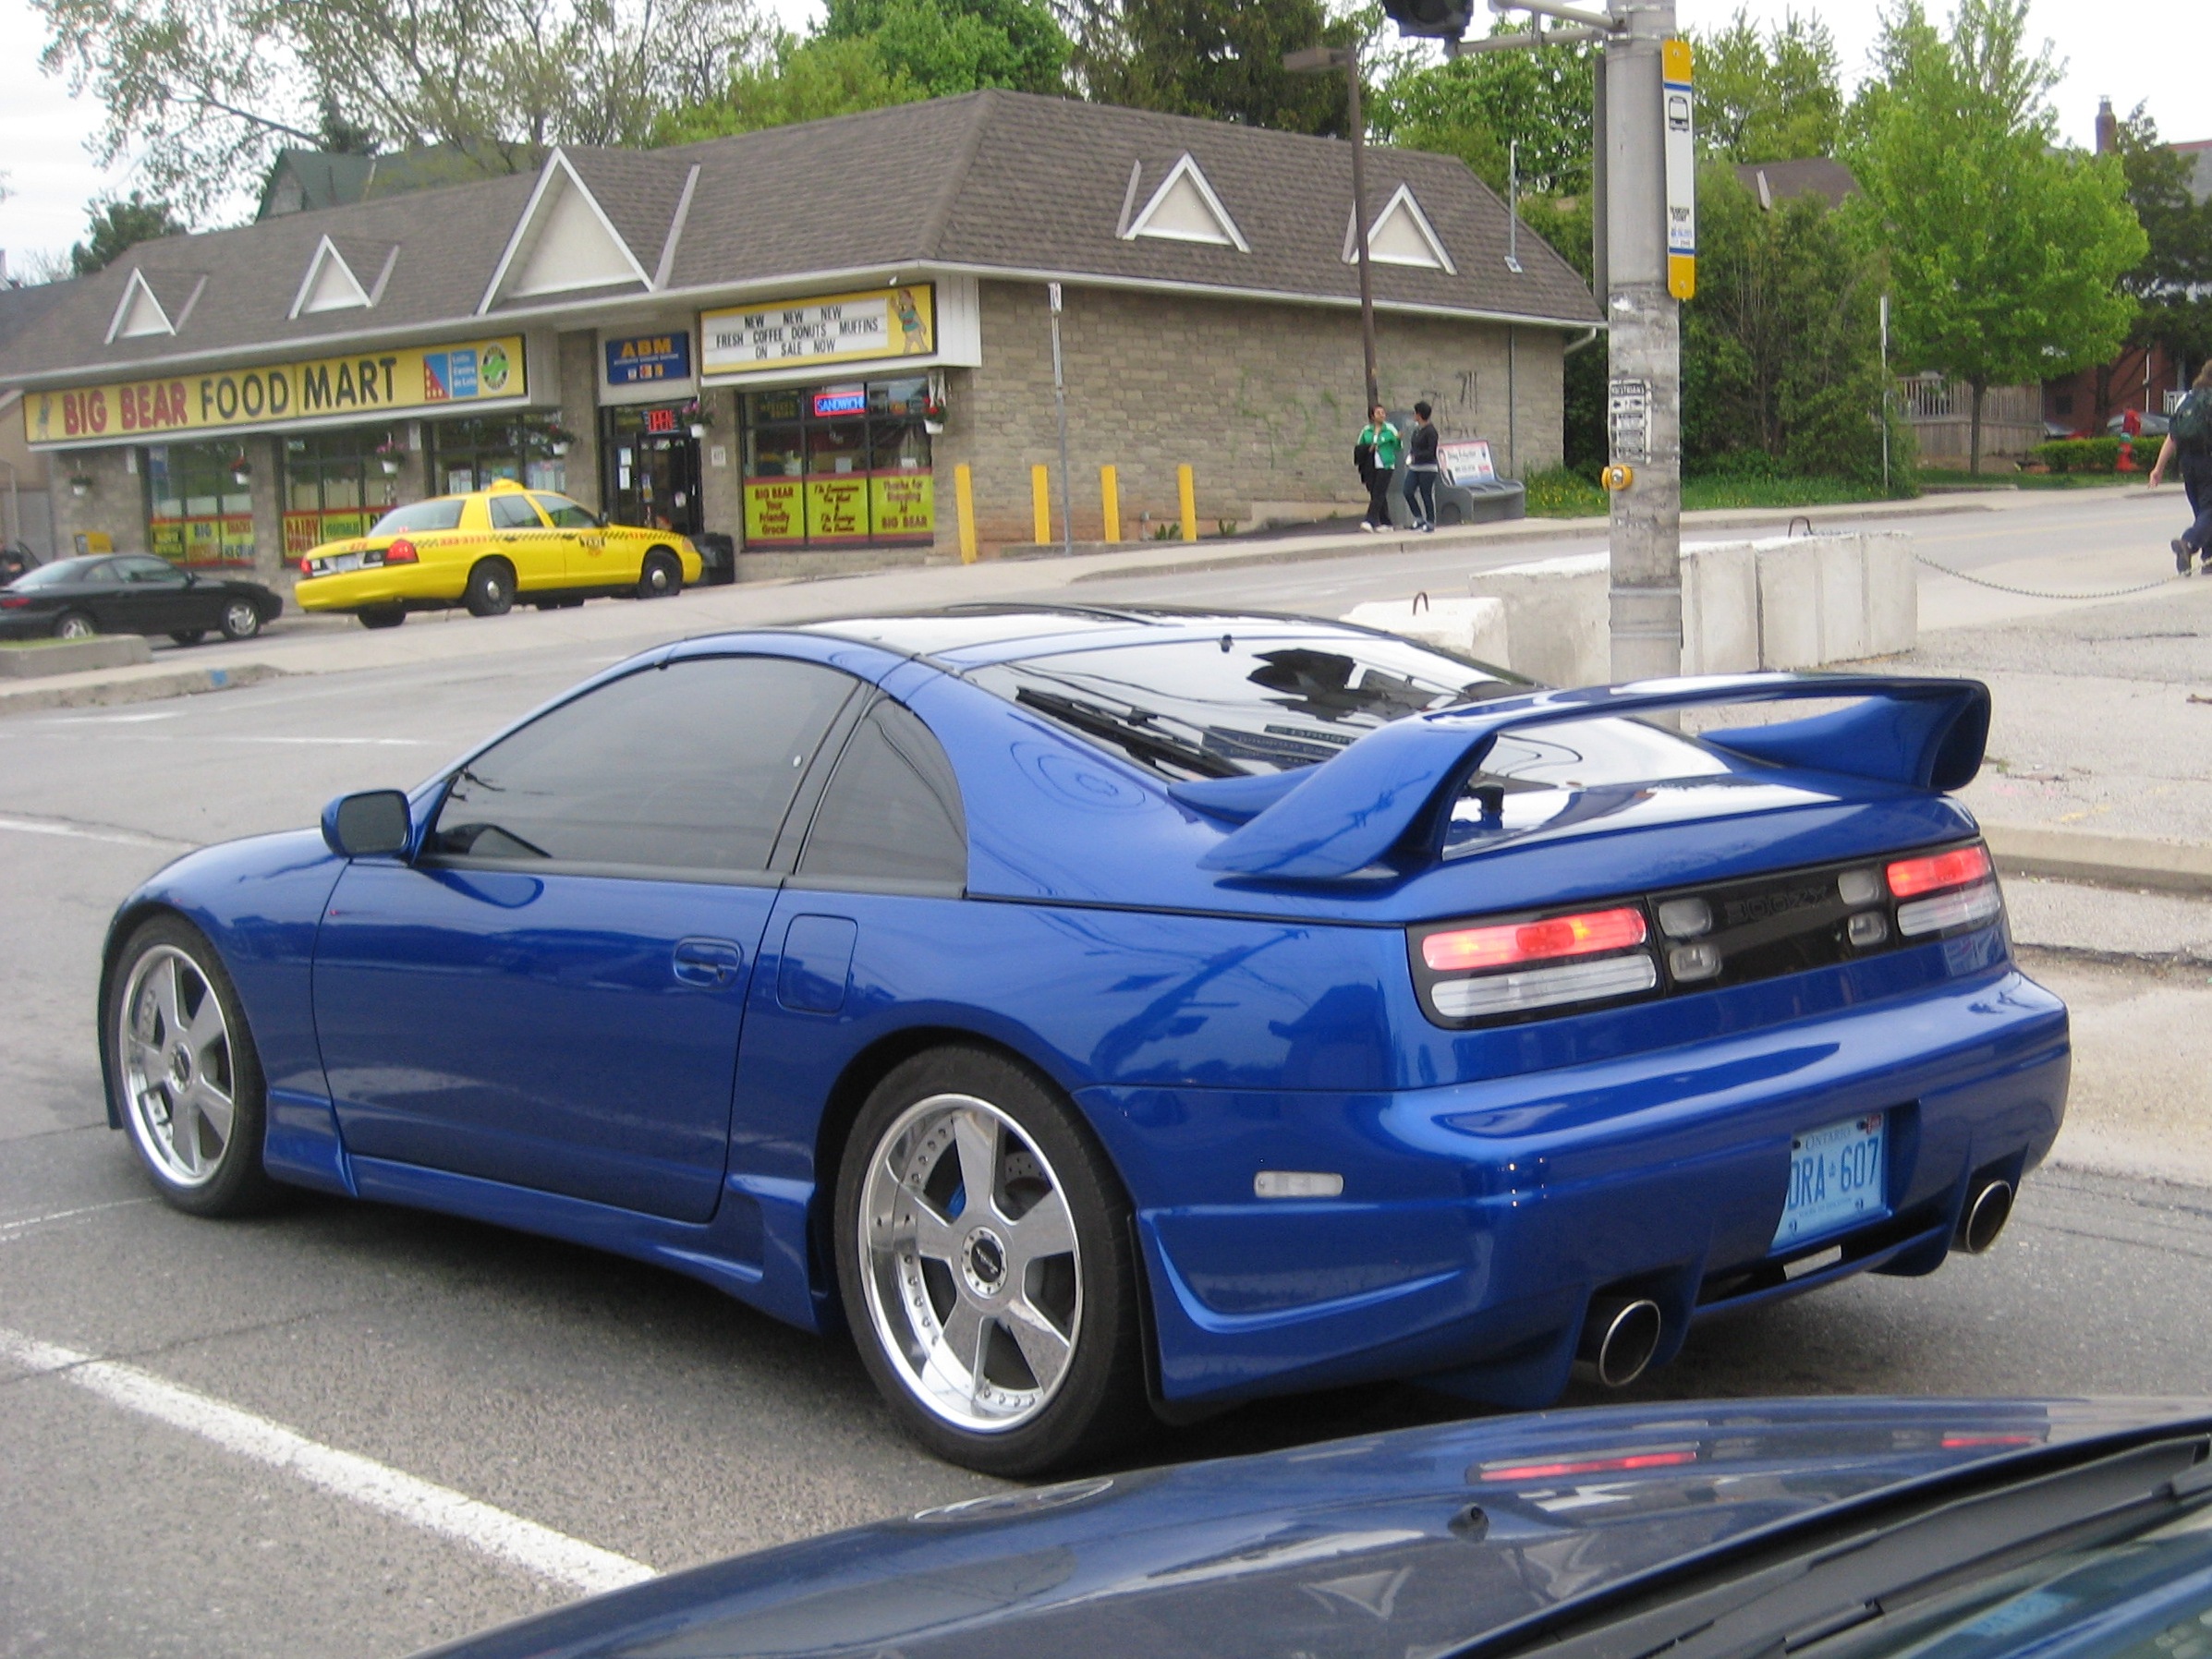 NISSAN 300 ZX technical details, history, photos on Better